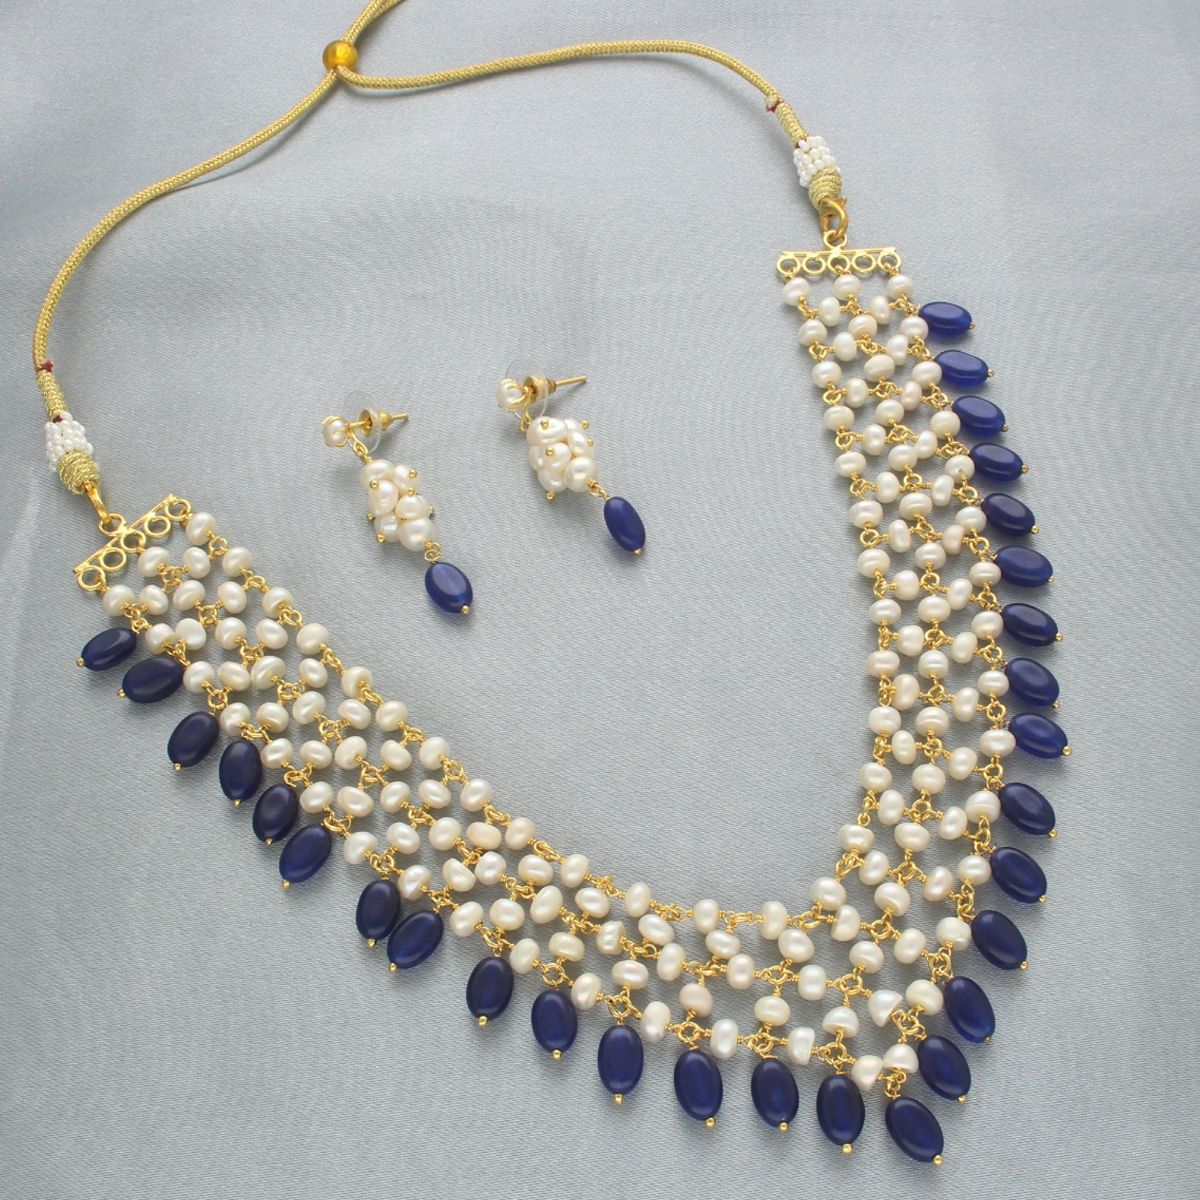 Buy Navy Blue Necklace Set With Brooch and Earrings Night Blue Pearl Light  Grey Ivory Torsade Multi Strand Crystal Pearls Mother of the Bride Online  in India - Etsy